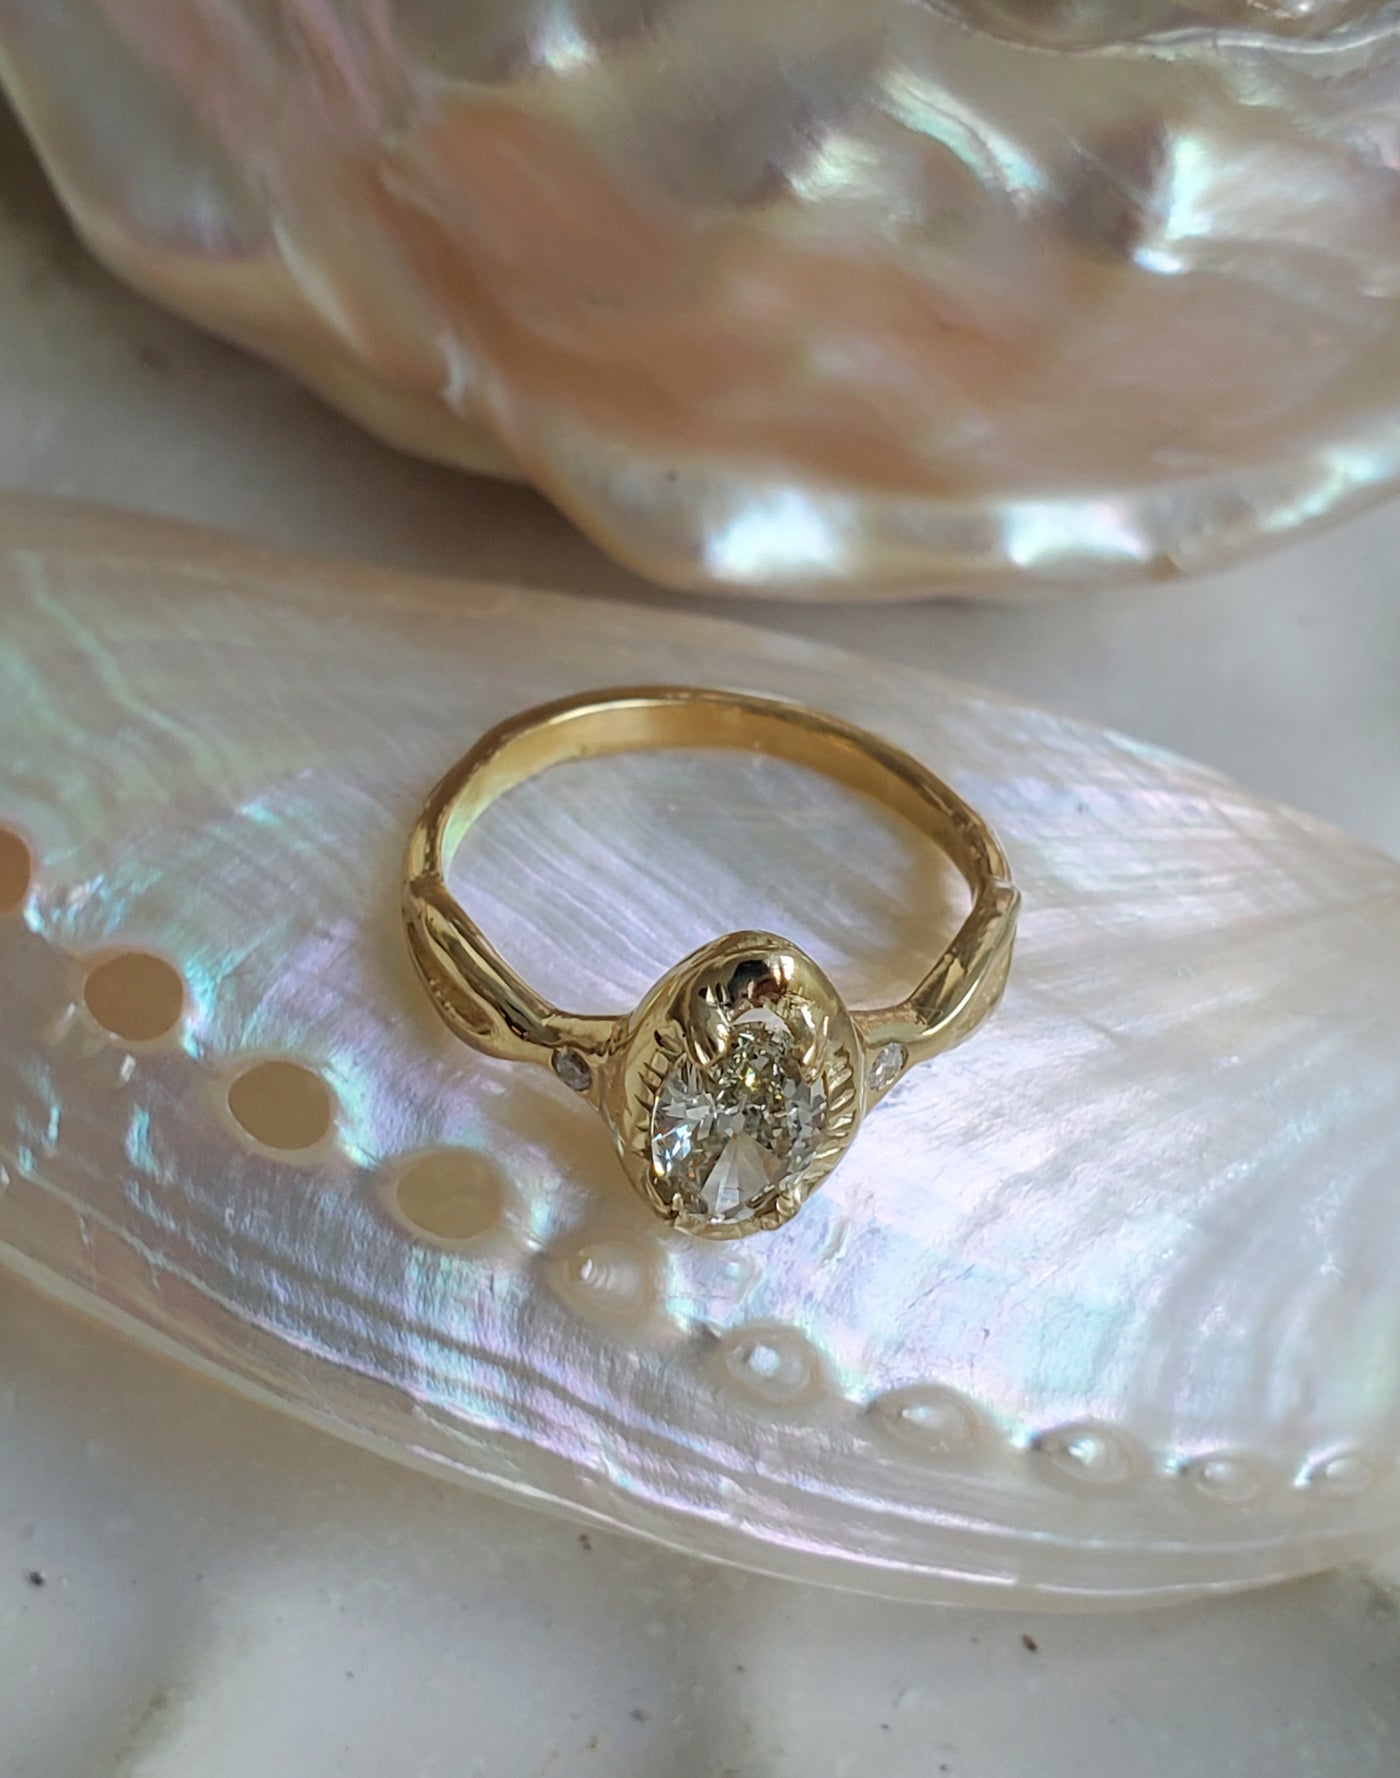 Enchanted Oval Antique Diamond Ring